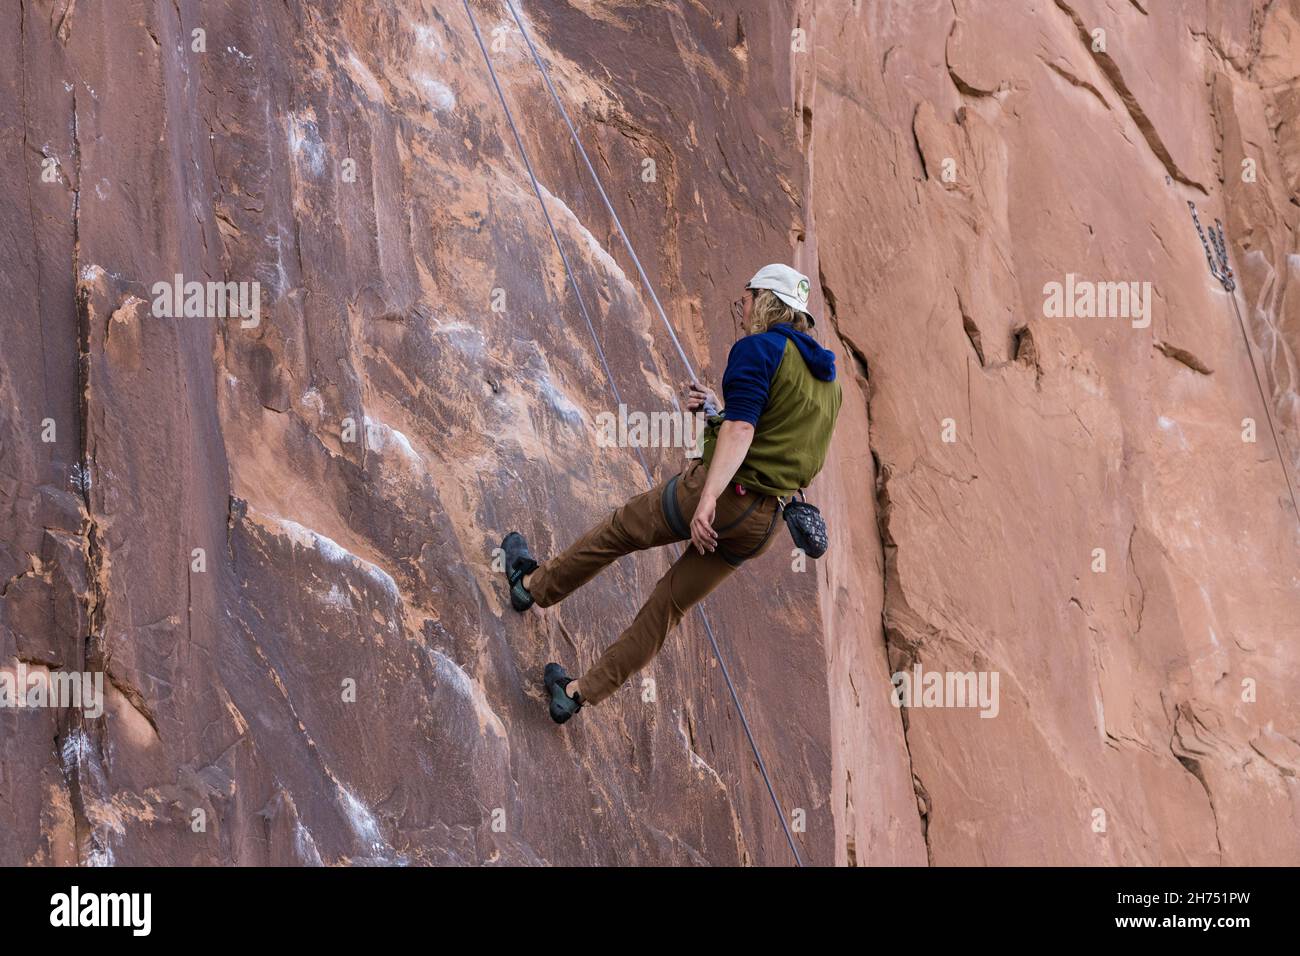 A sport climber rapels down the Nervous in Suburbia route in the Wall Street climbing area by Moab, Utah. Stock Photo